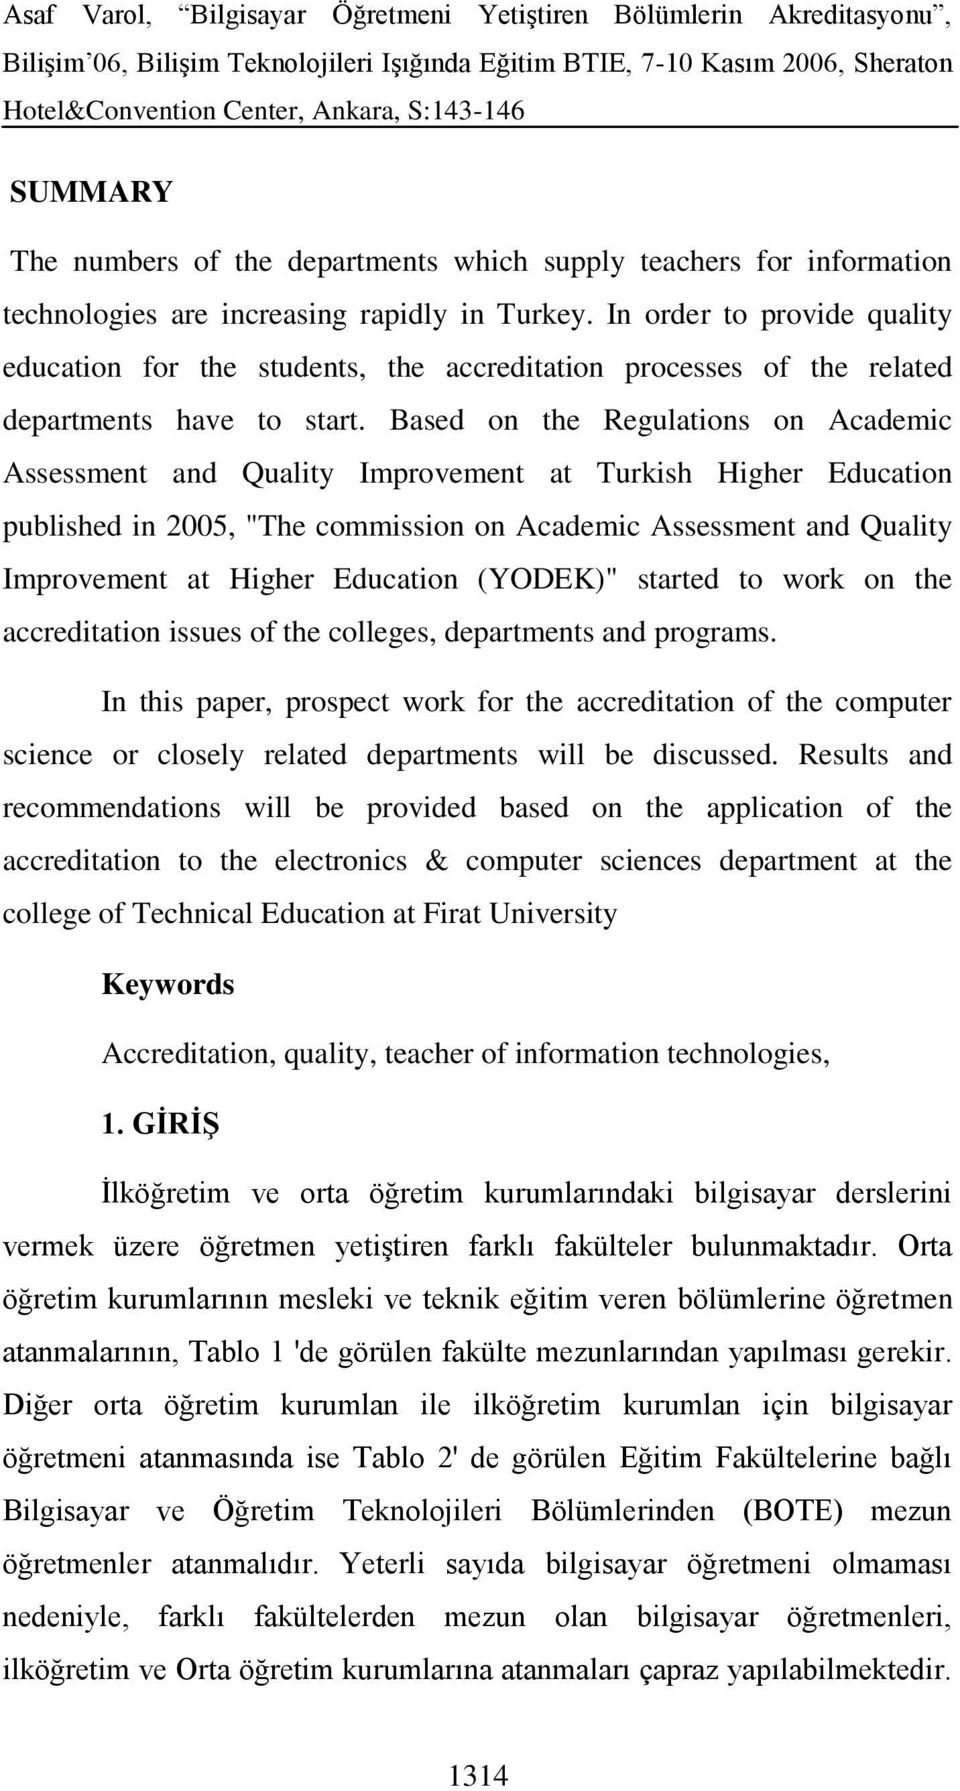 Based on the Regulations on Academic Assessment and Quality Improvement at Turkish Higher Education published in 2005, "The commission on Academic Assessment and Quality Improvement at Higher